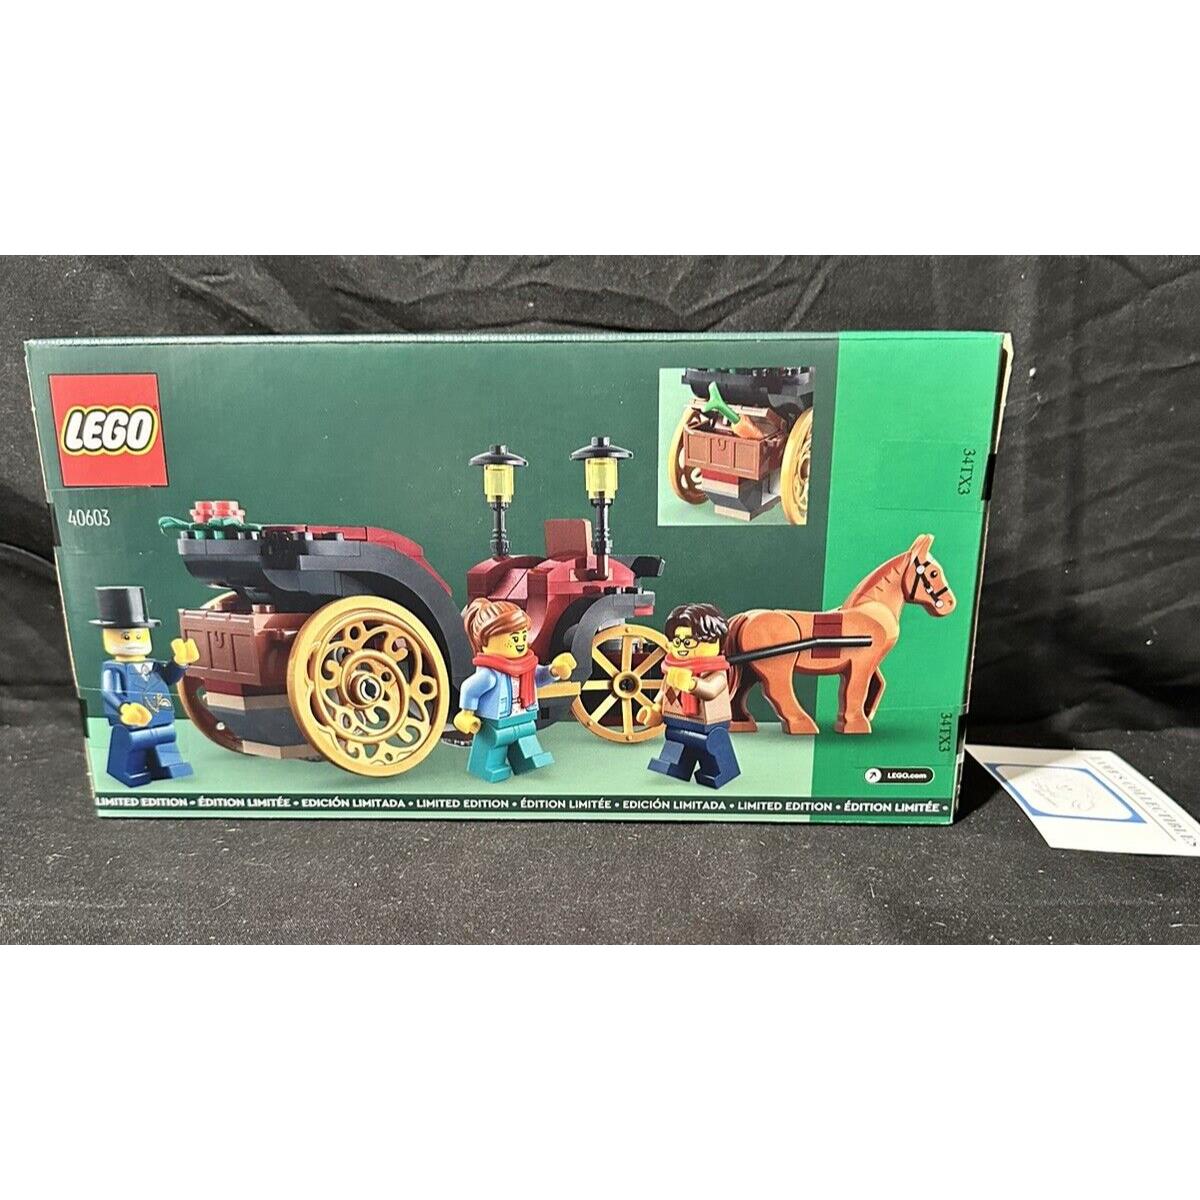 Lego 40603 Wintertime Carriage Ride Limited Edition Build Set 153 Pieces